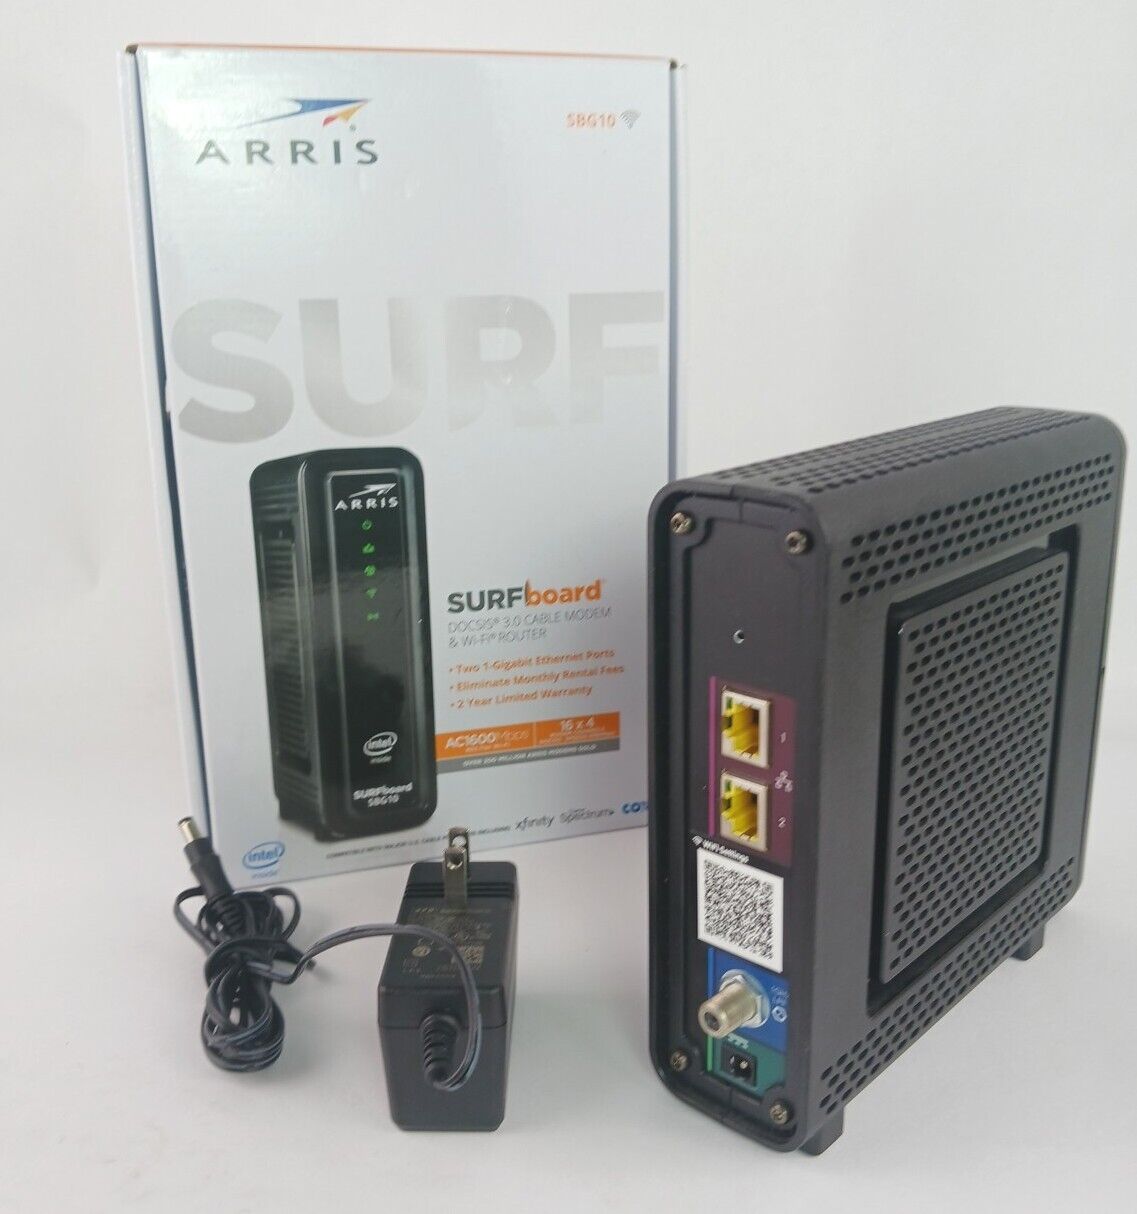 Router ARRIS Surfboard SBG10 DOCSIS 3.0 Cable Modem & Wi-Fi Router used clean